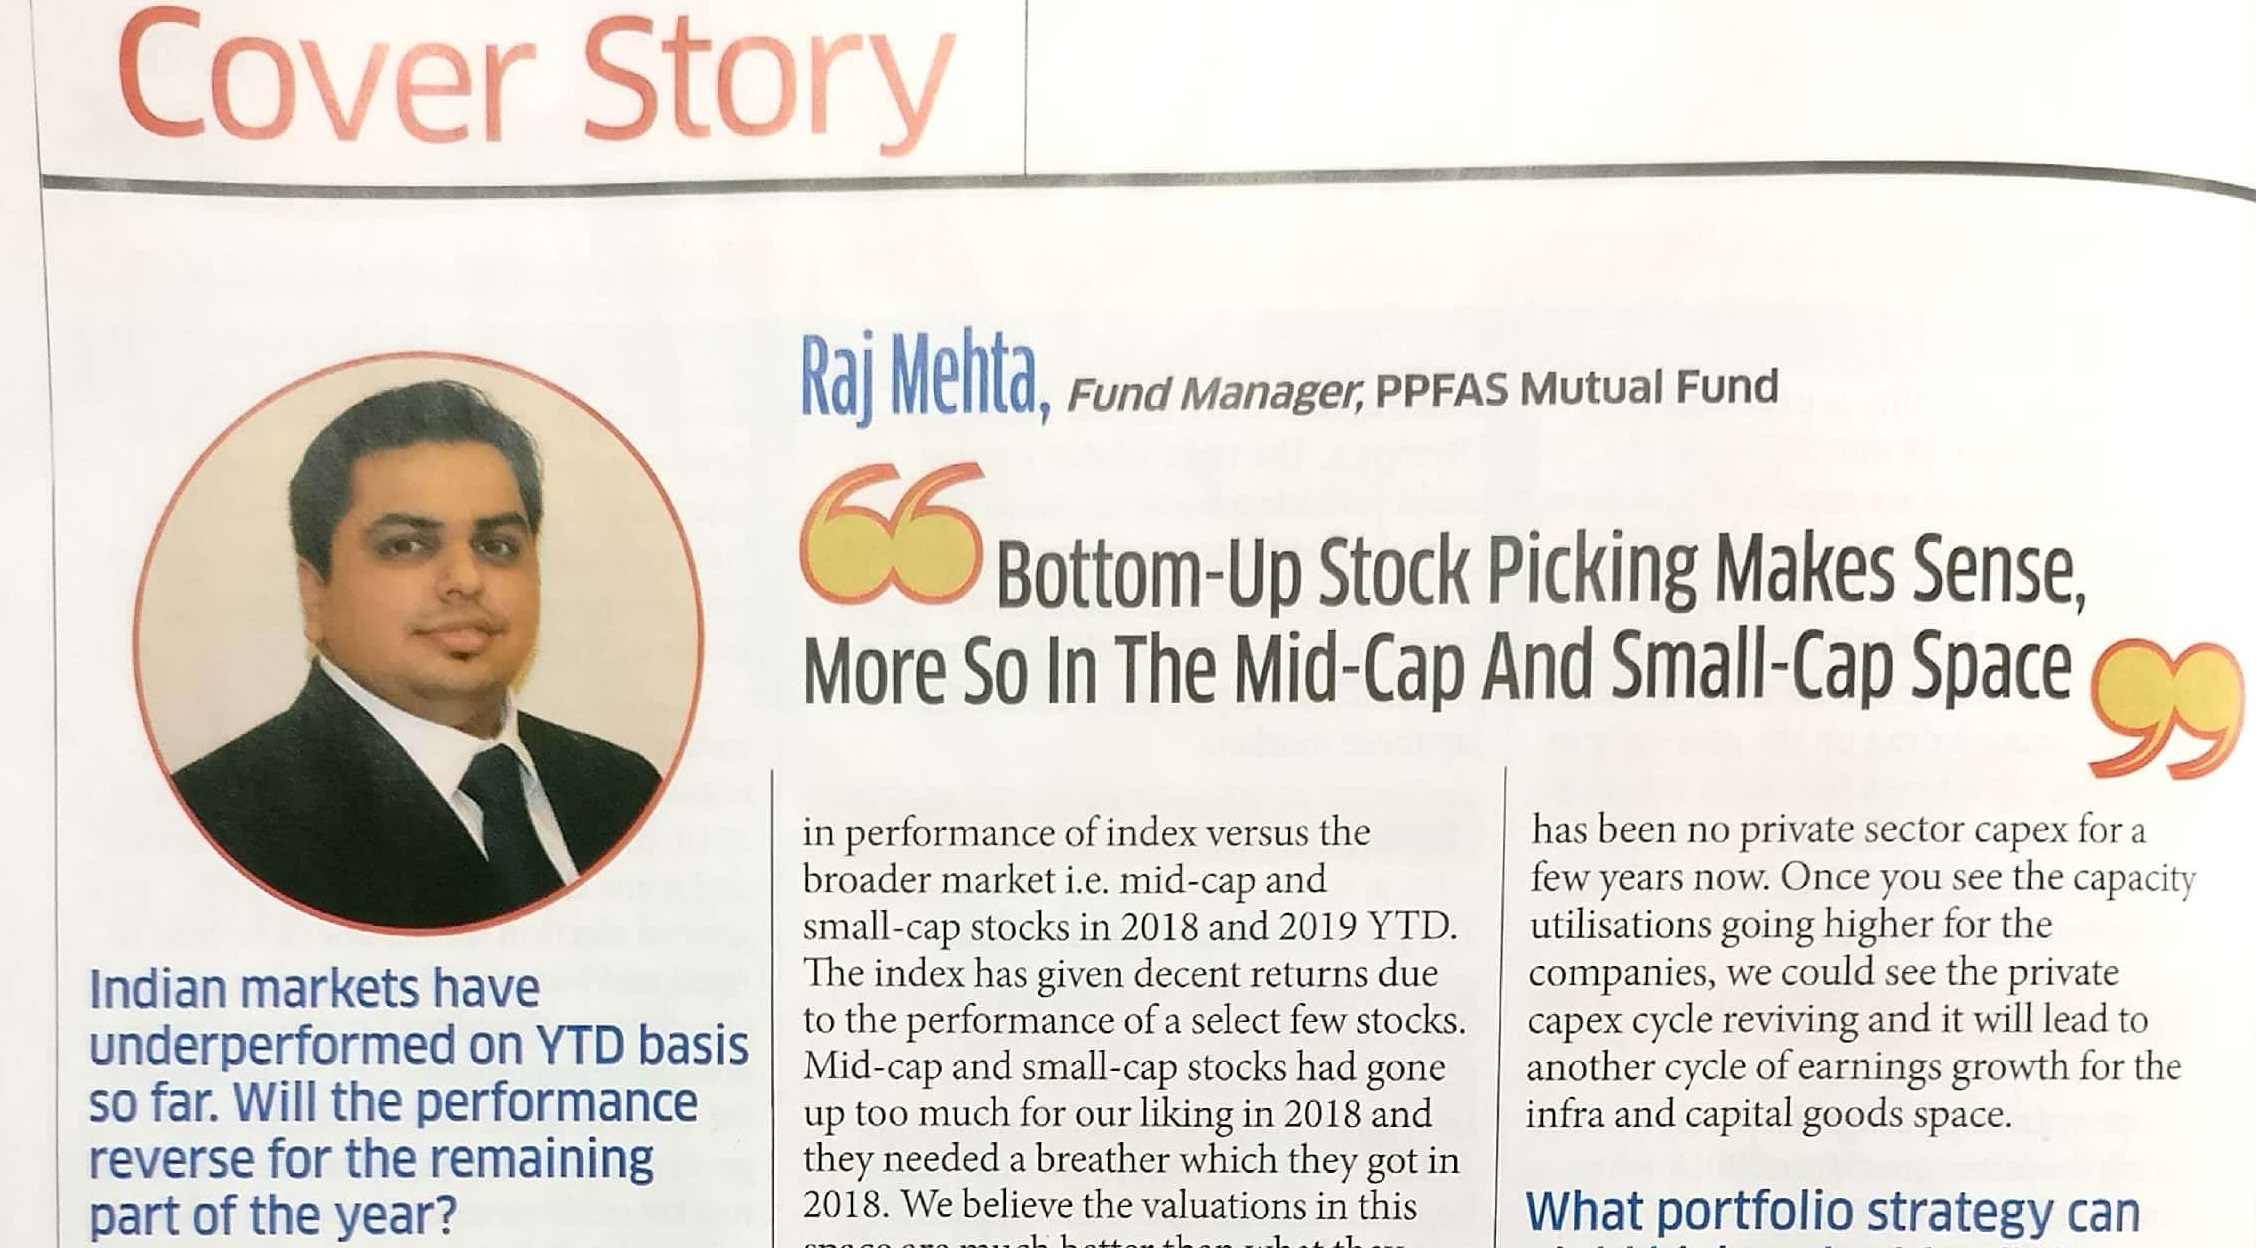 'Bottom-Up Stock Picking Makes Sense, More So in The Mid-Cap And Small-Cap Space'